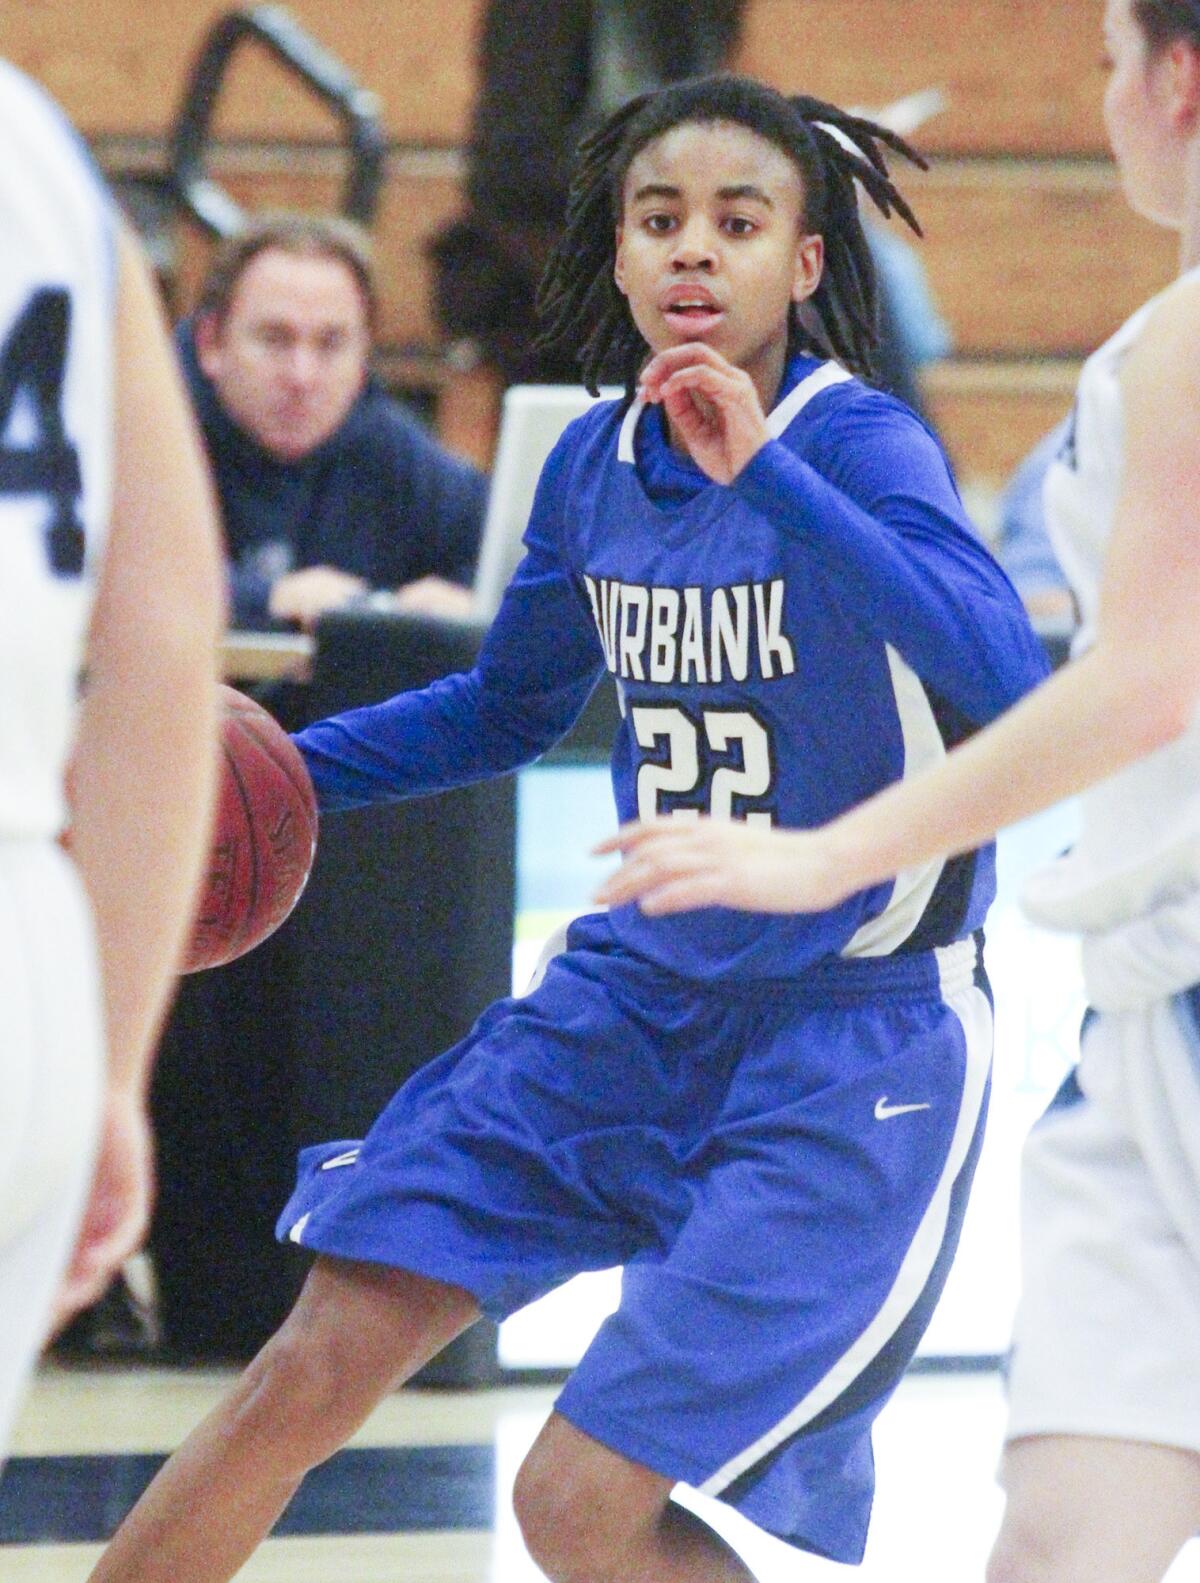 Burbank's Yassemeen Sa'Dullah dribbles upcourt against Crescenta Valley in a Pacific League girls basketball game at Crescenta Valley High School on Wednesday, February 5, 2014.